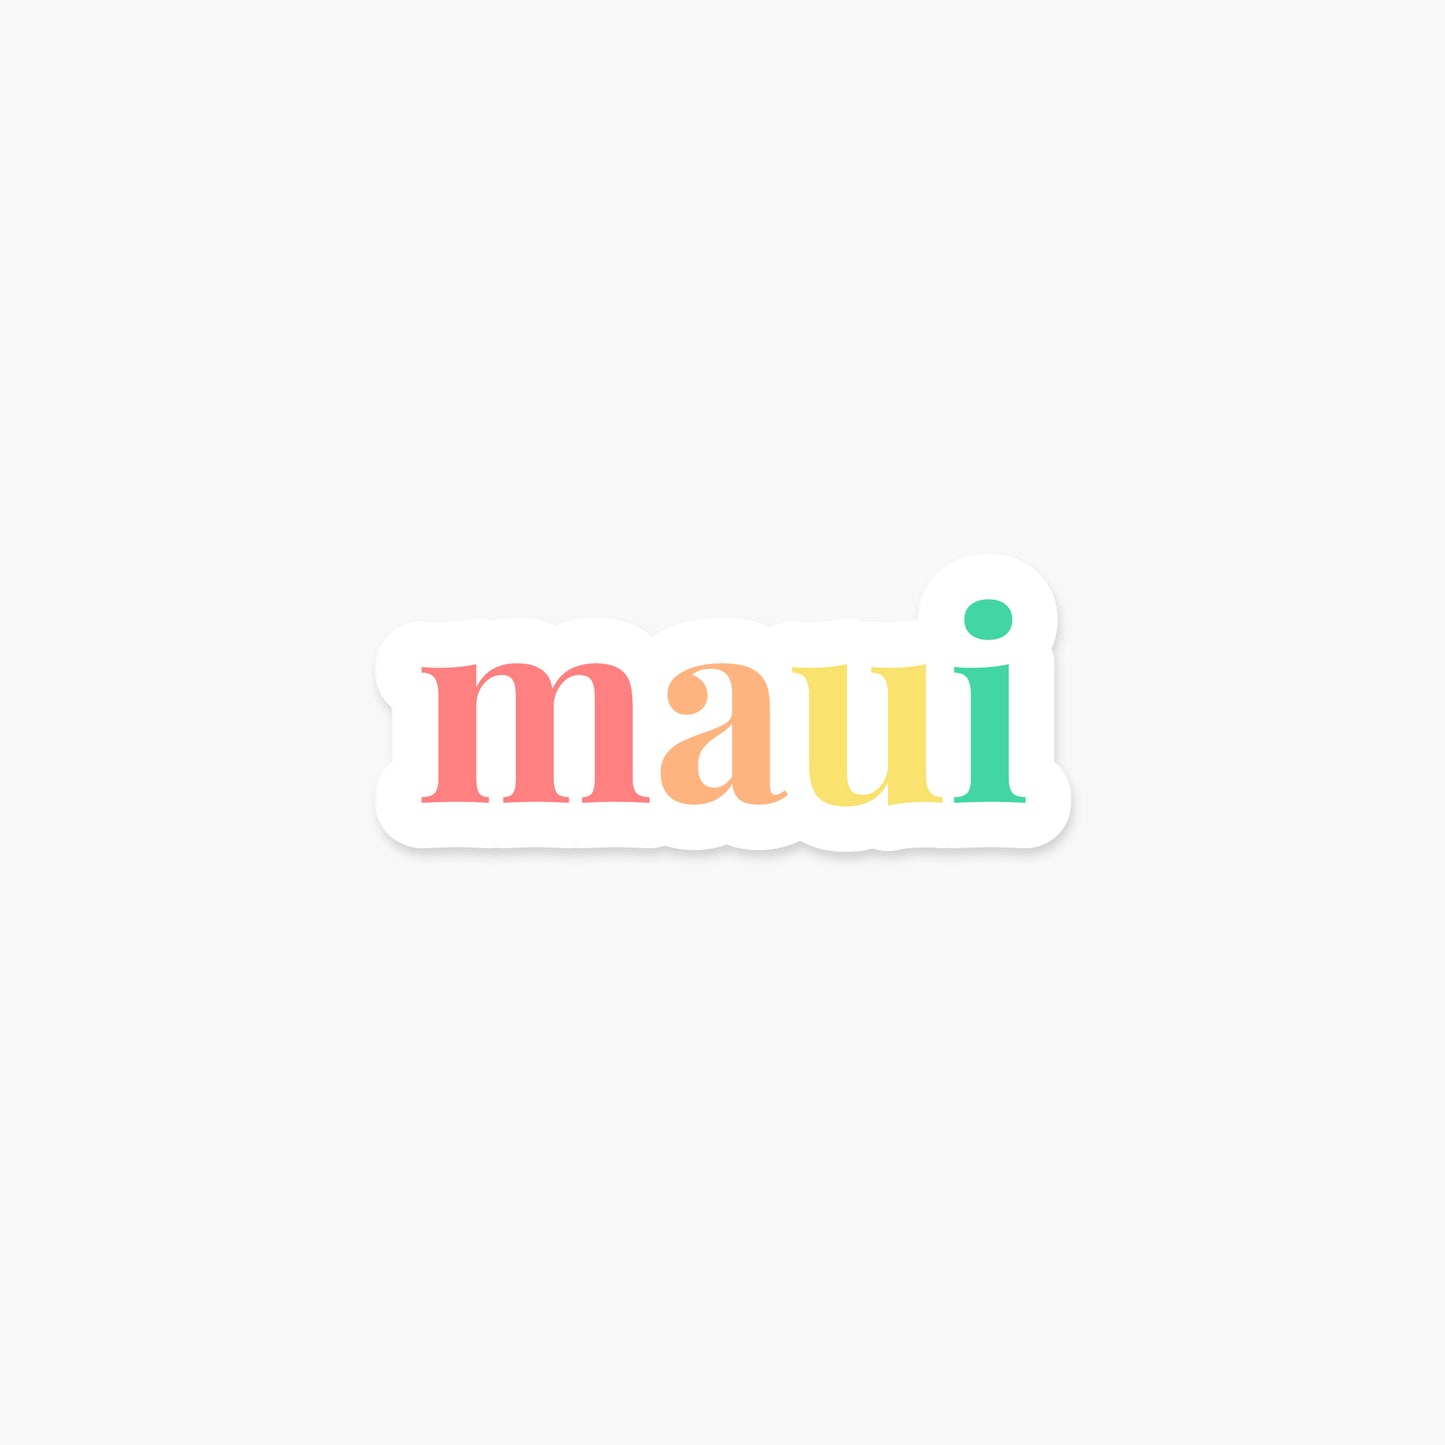 Maui, Hawaii - Everyday Sticker | Footnotes Paper